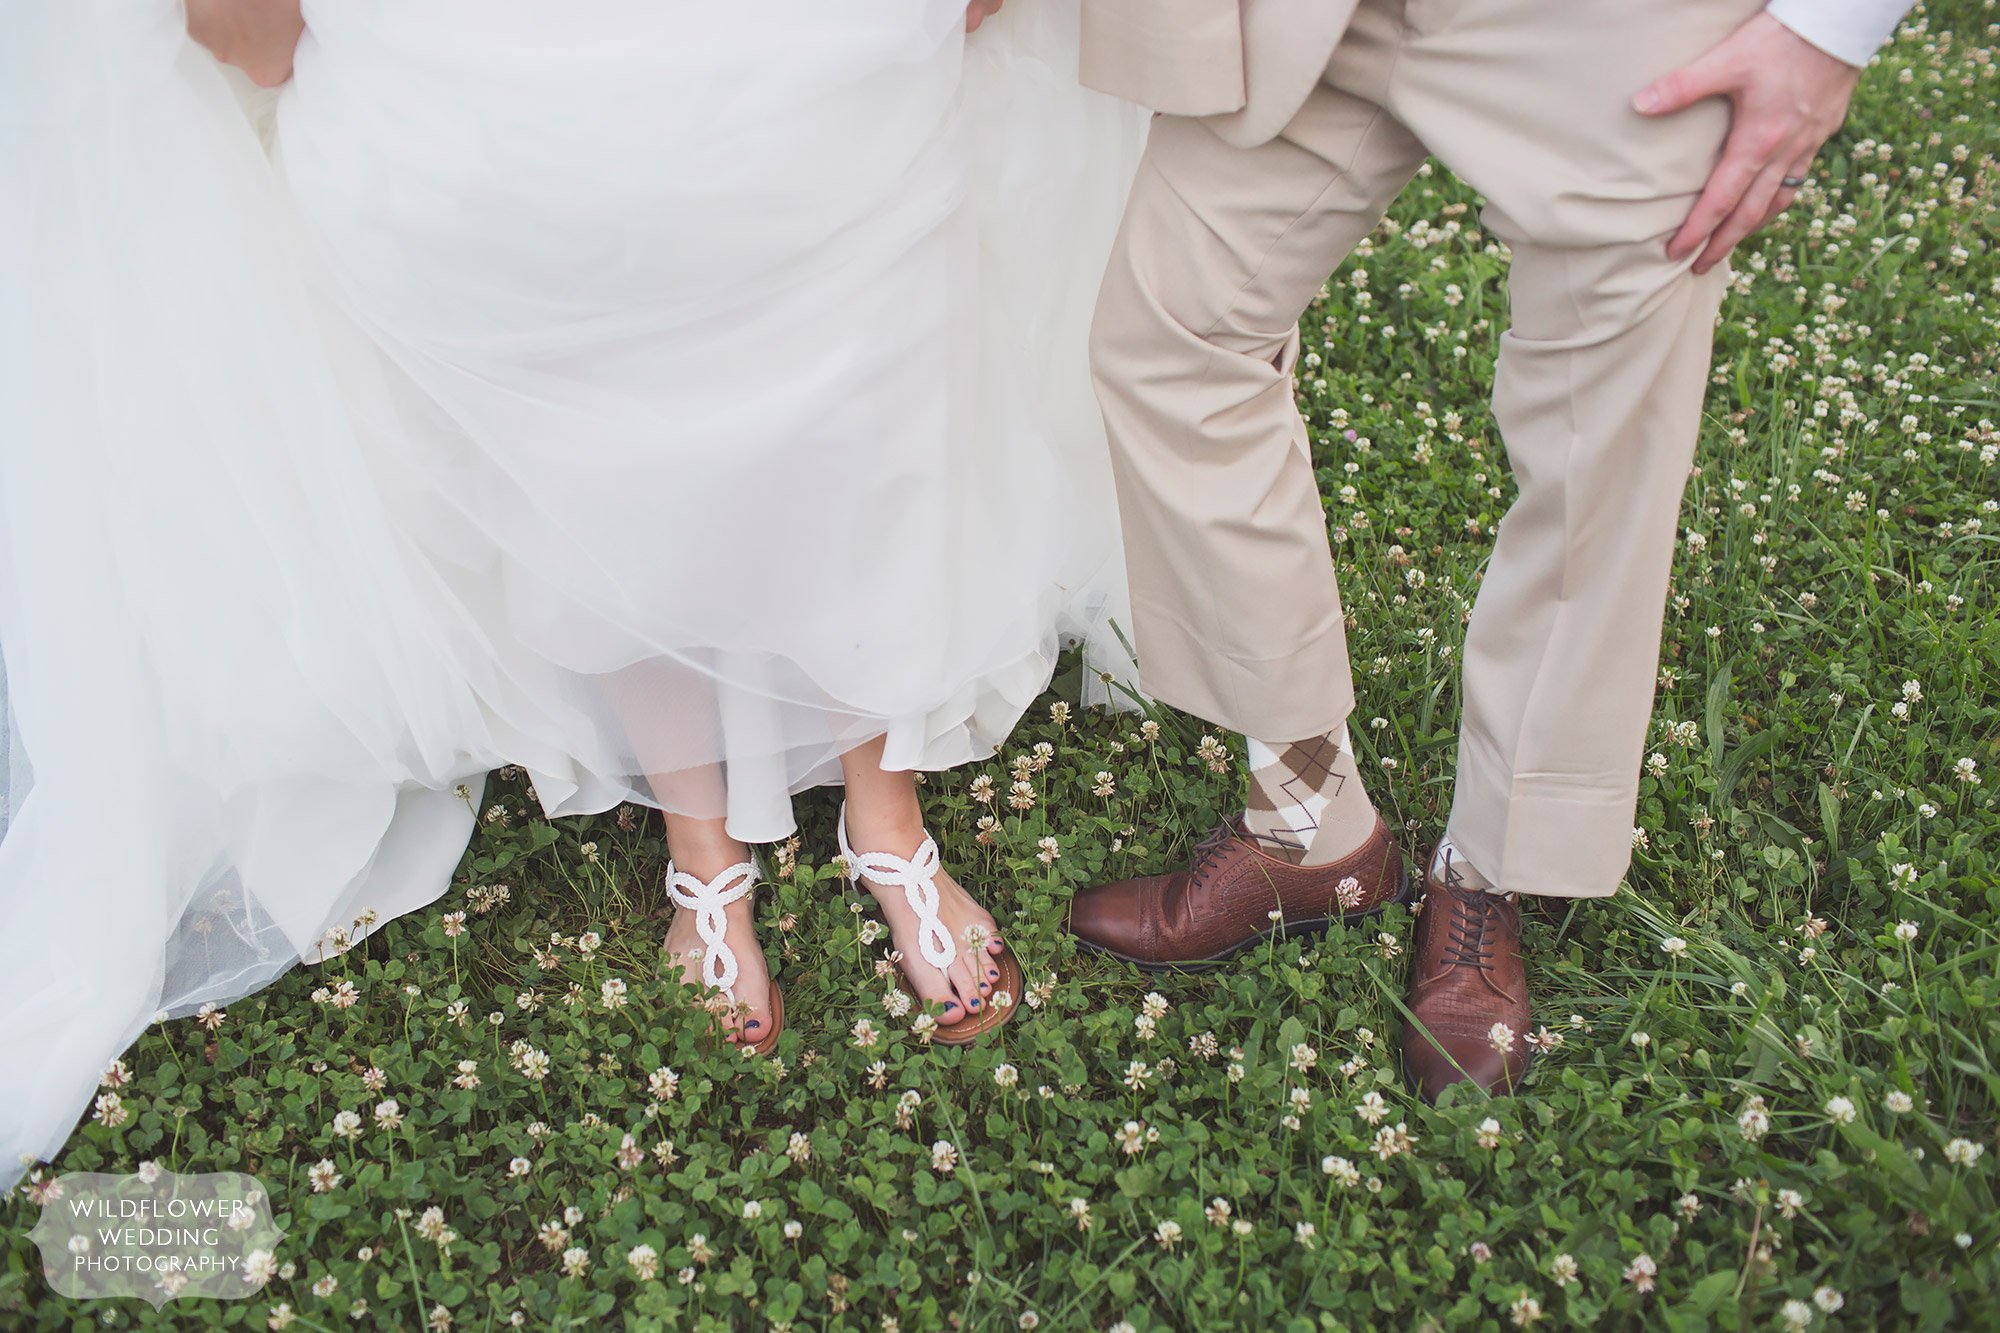 Fun wedding photo of the bride and groom's shoes at this country wedding at MU.